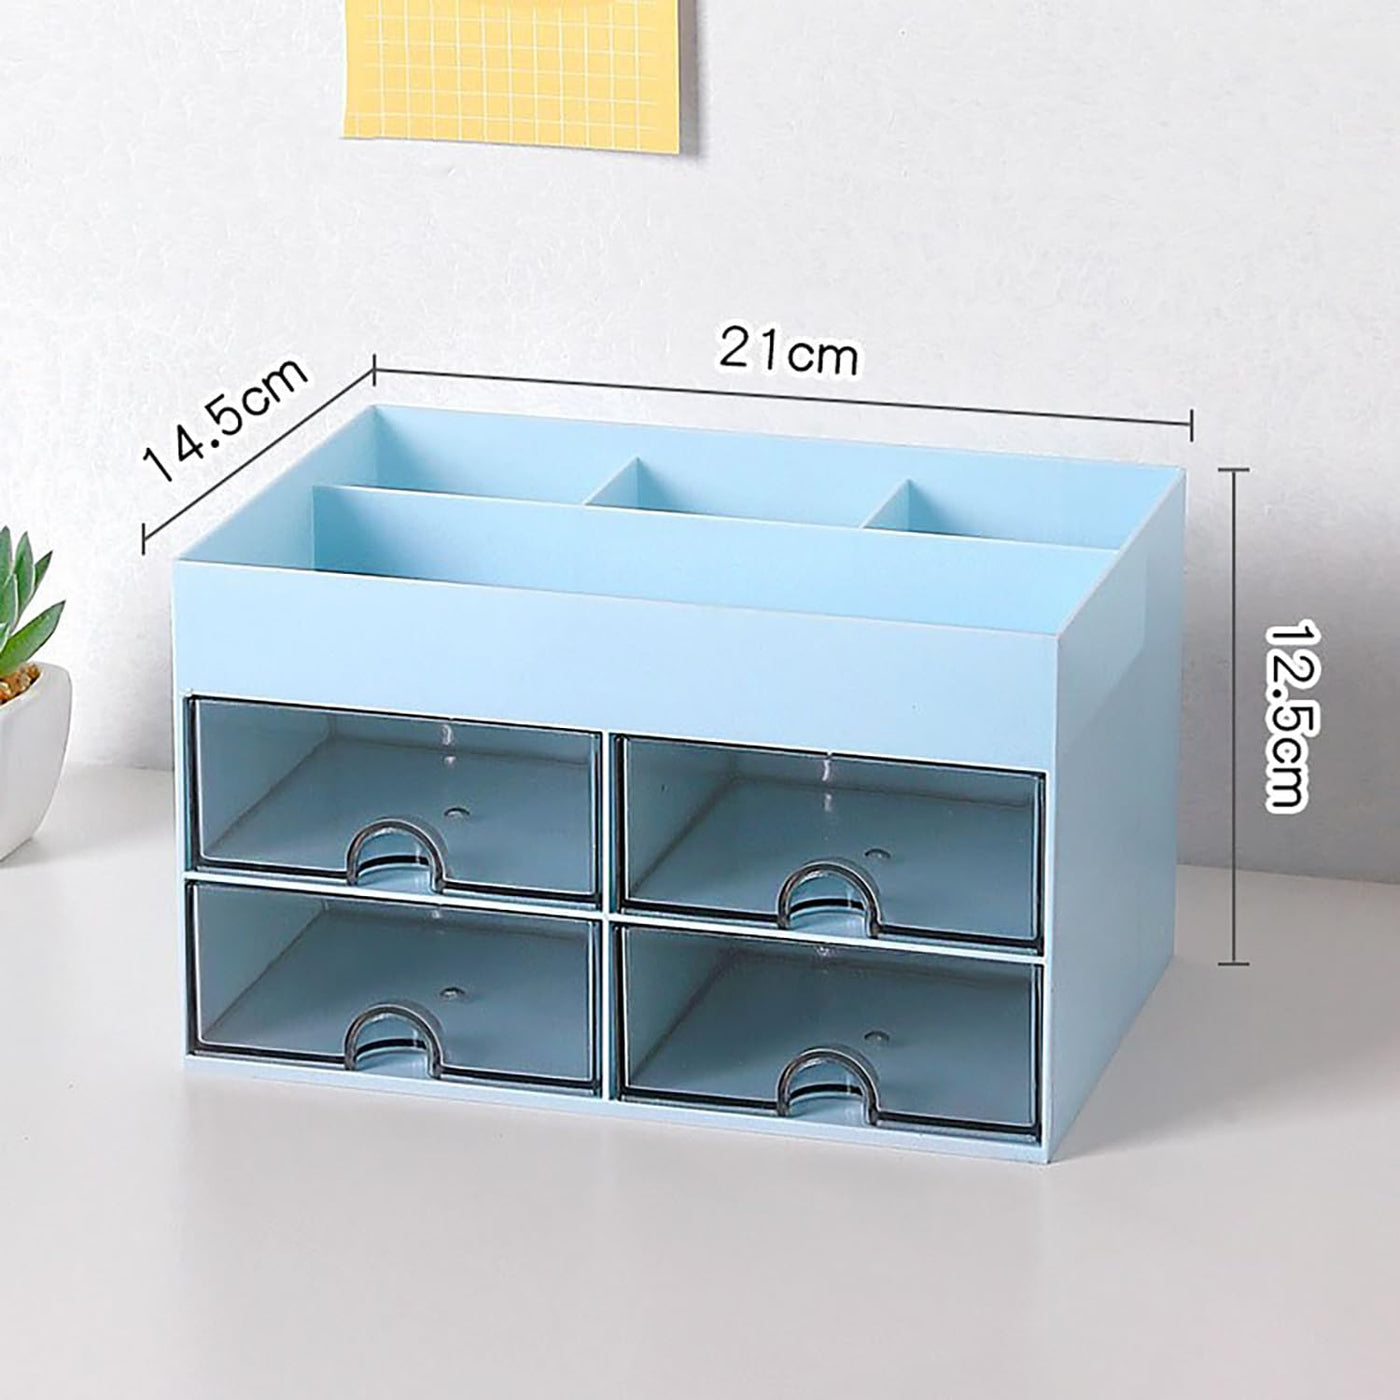 Desk Organiser with Drawer, Multifunctional 4 Plastic Compartments - Blue